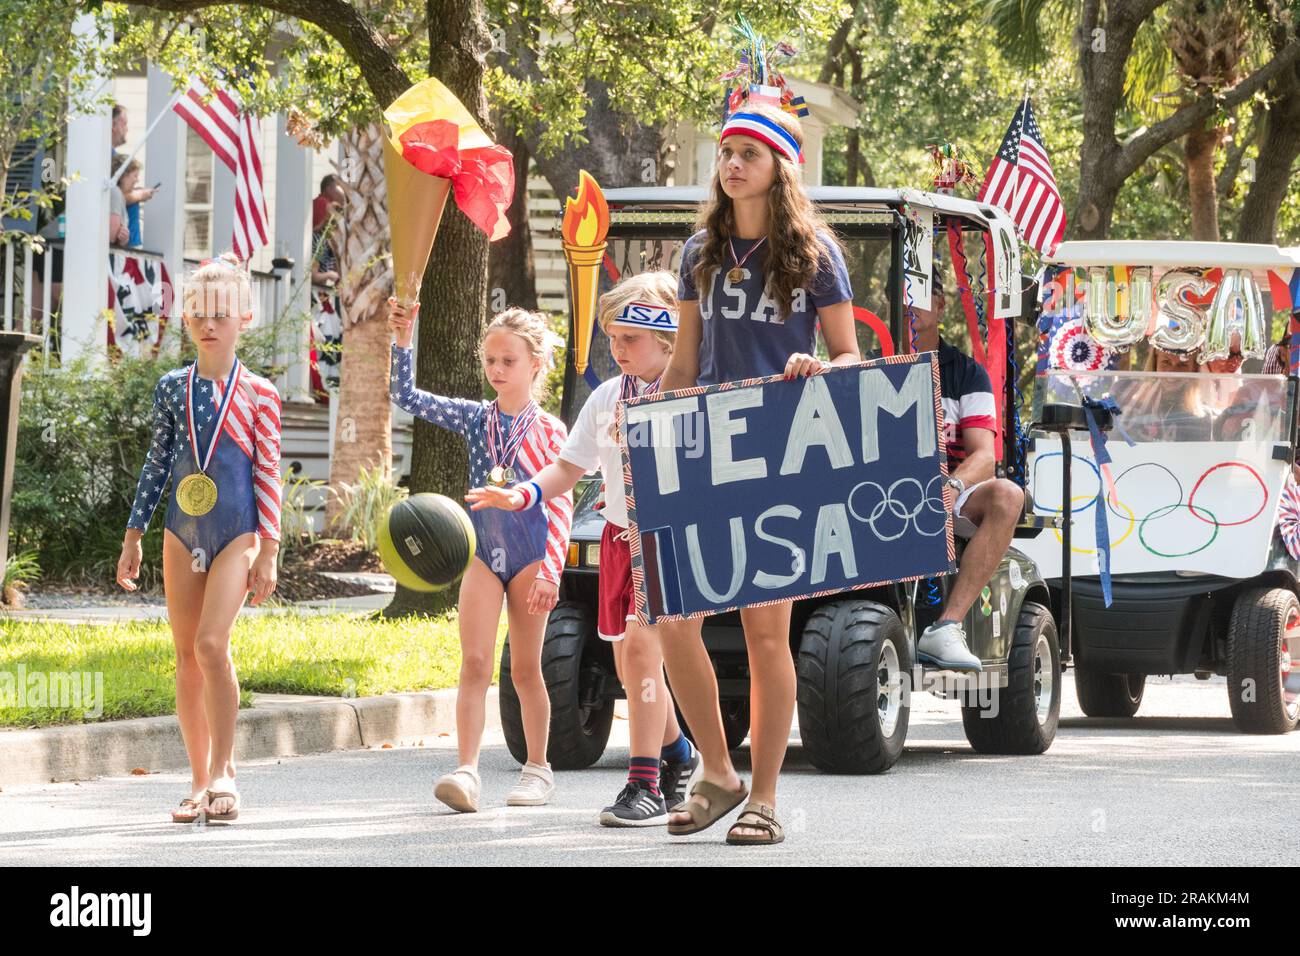 Children dressed in patriotic colors honor the USA Olympic team during the annual Bicycle and Golf cart parade celebrating Independence Day at the I’on Community, July 4, 2021 in Mt Pleasant, South Carolina. Stock Photo